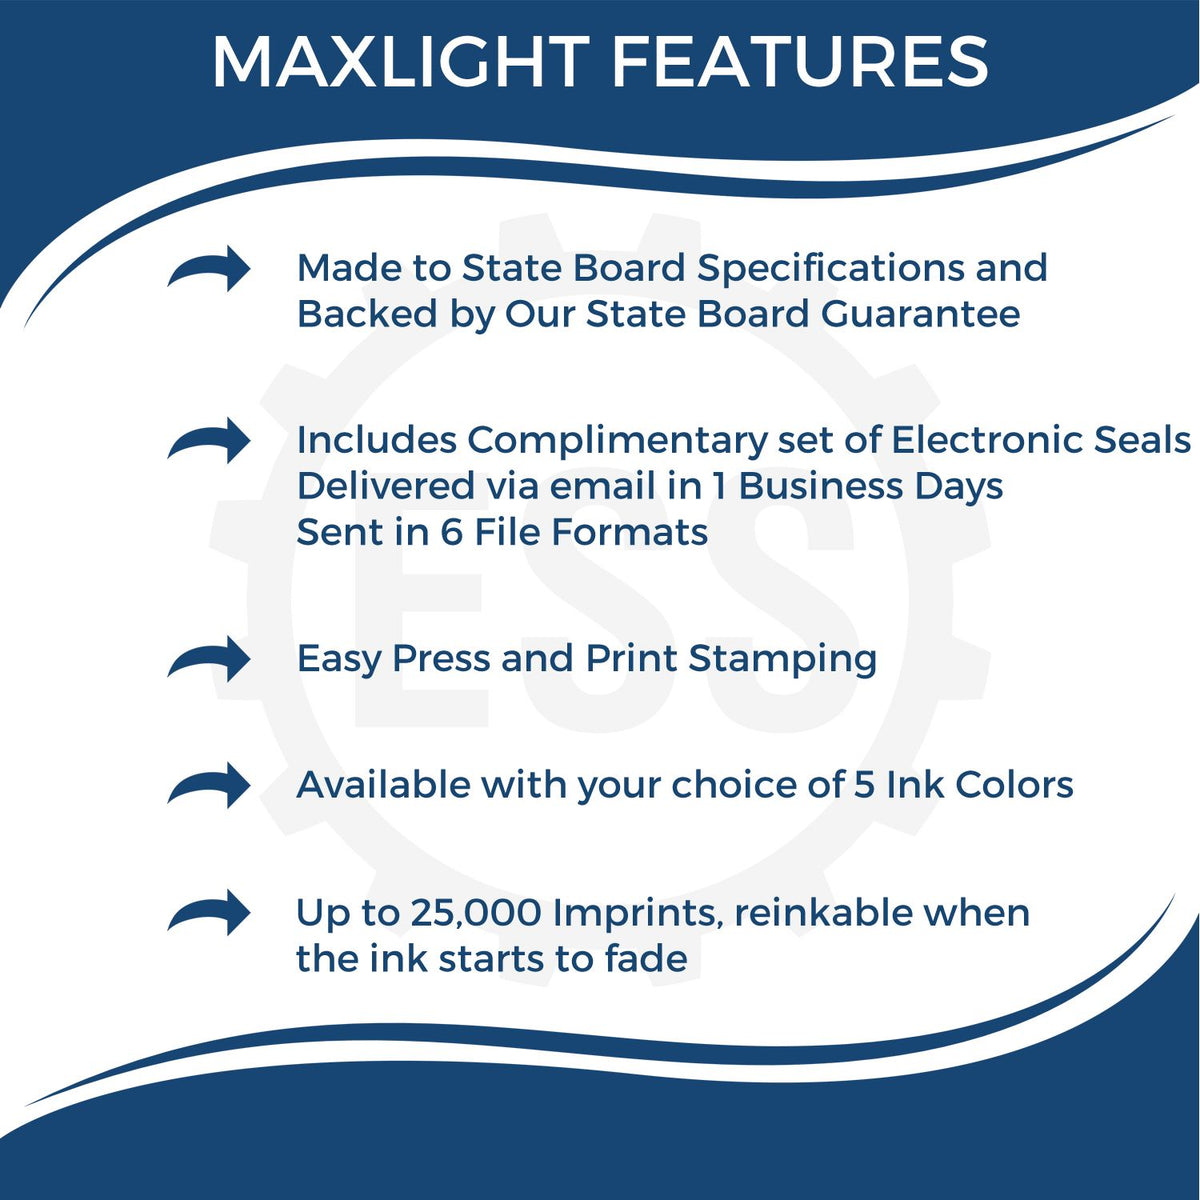 A picture of an infographic highlighting the selling points for the Premium MaxLight Pre-Inked Wyoming Geology Stamp